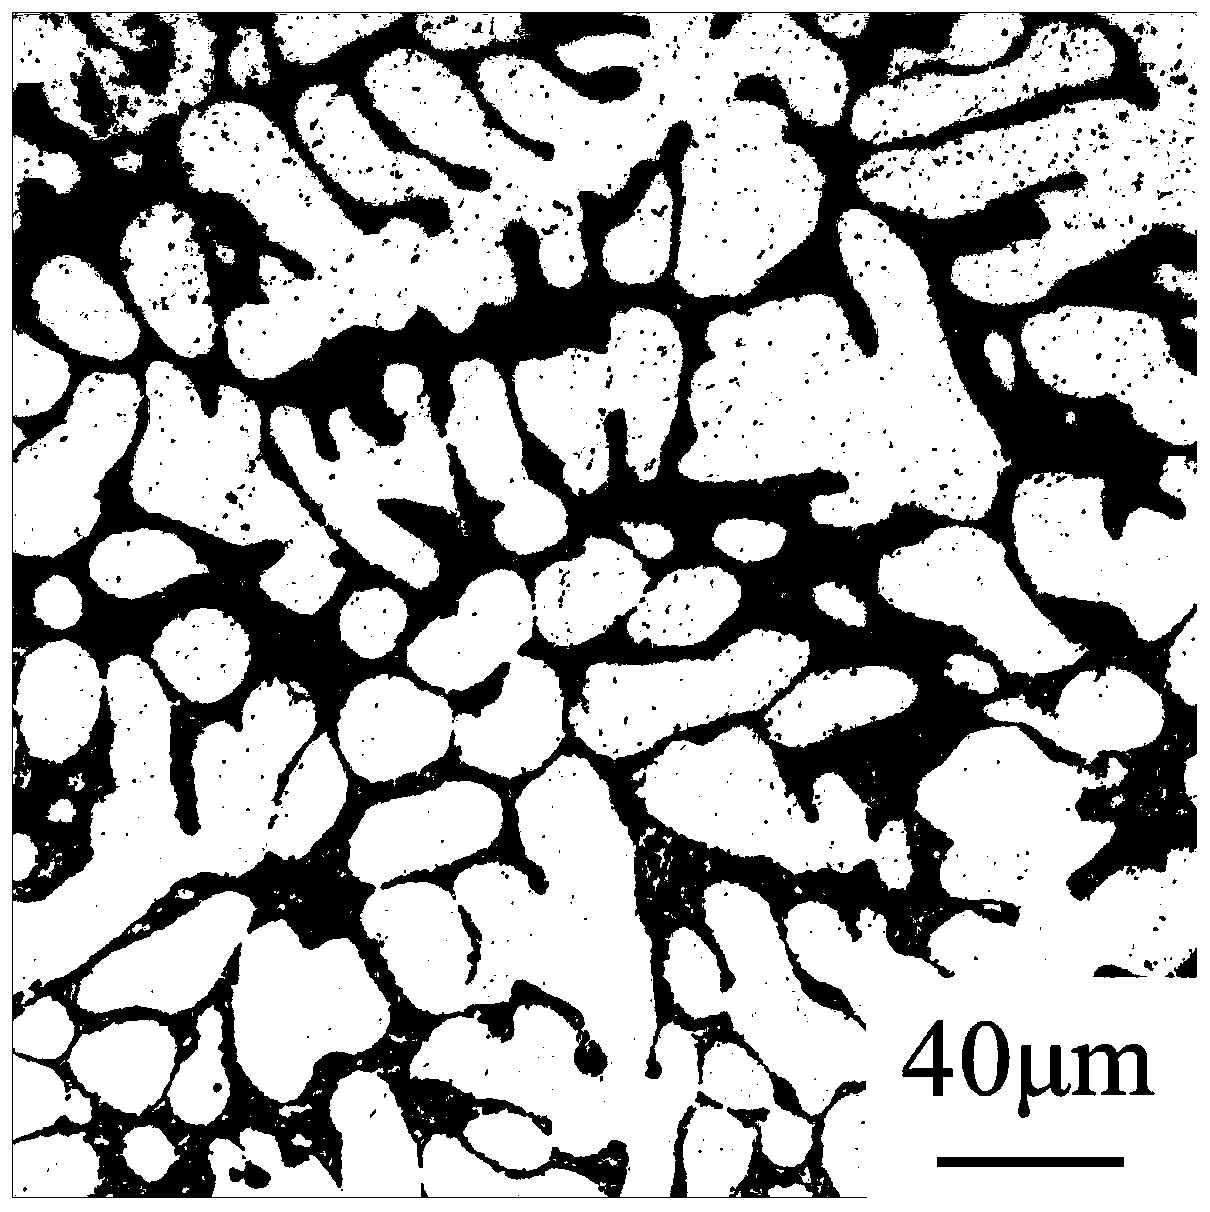 A method for synergistic hypoeutectic casting Al-Si alloy modification and microalloying